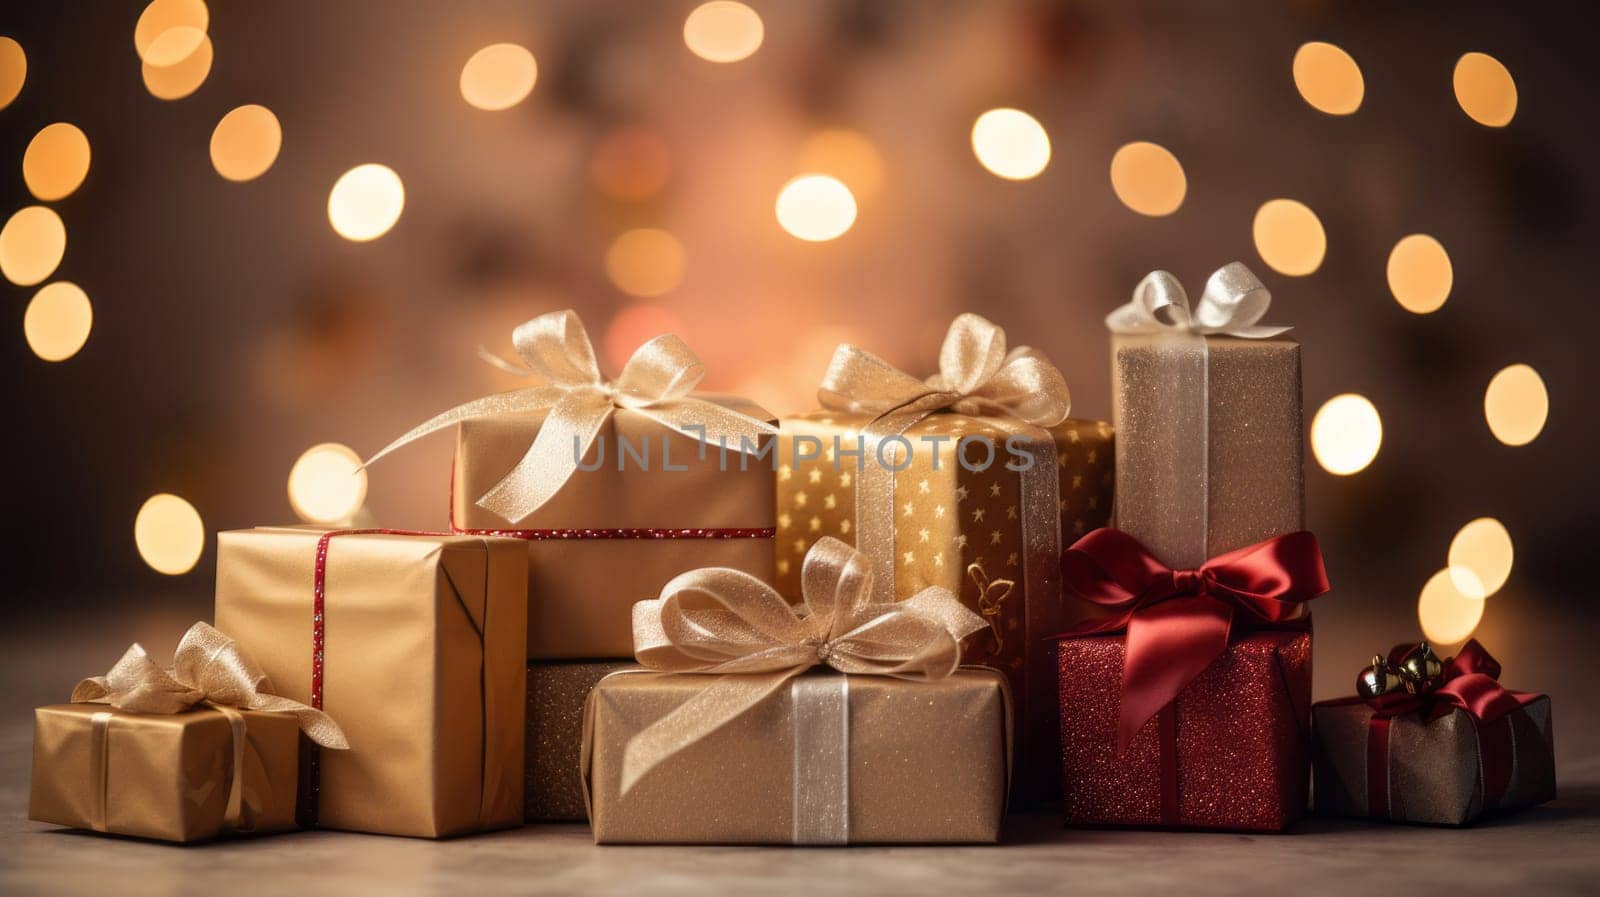 A pile of wrapped Christmas presents with ribbons and bows, with a blurred background of Christmas lights. The concept is Christmas and gift giving. High quality photo